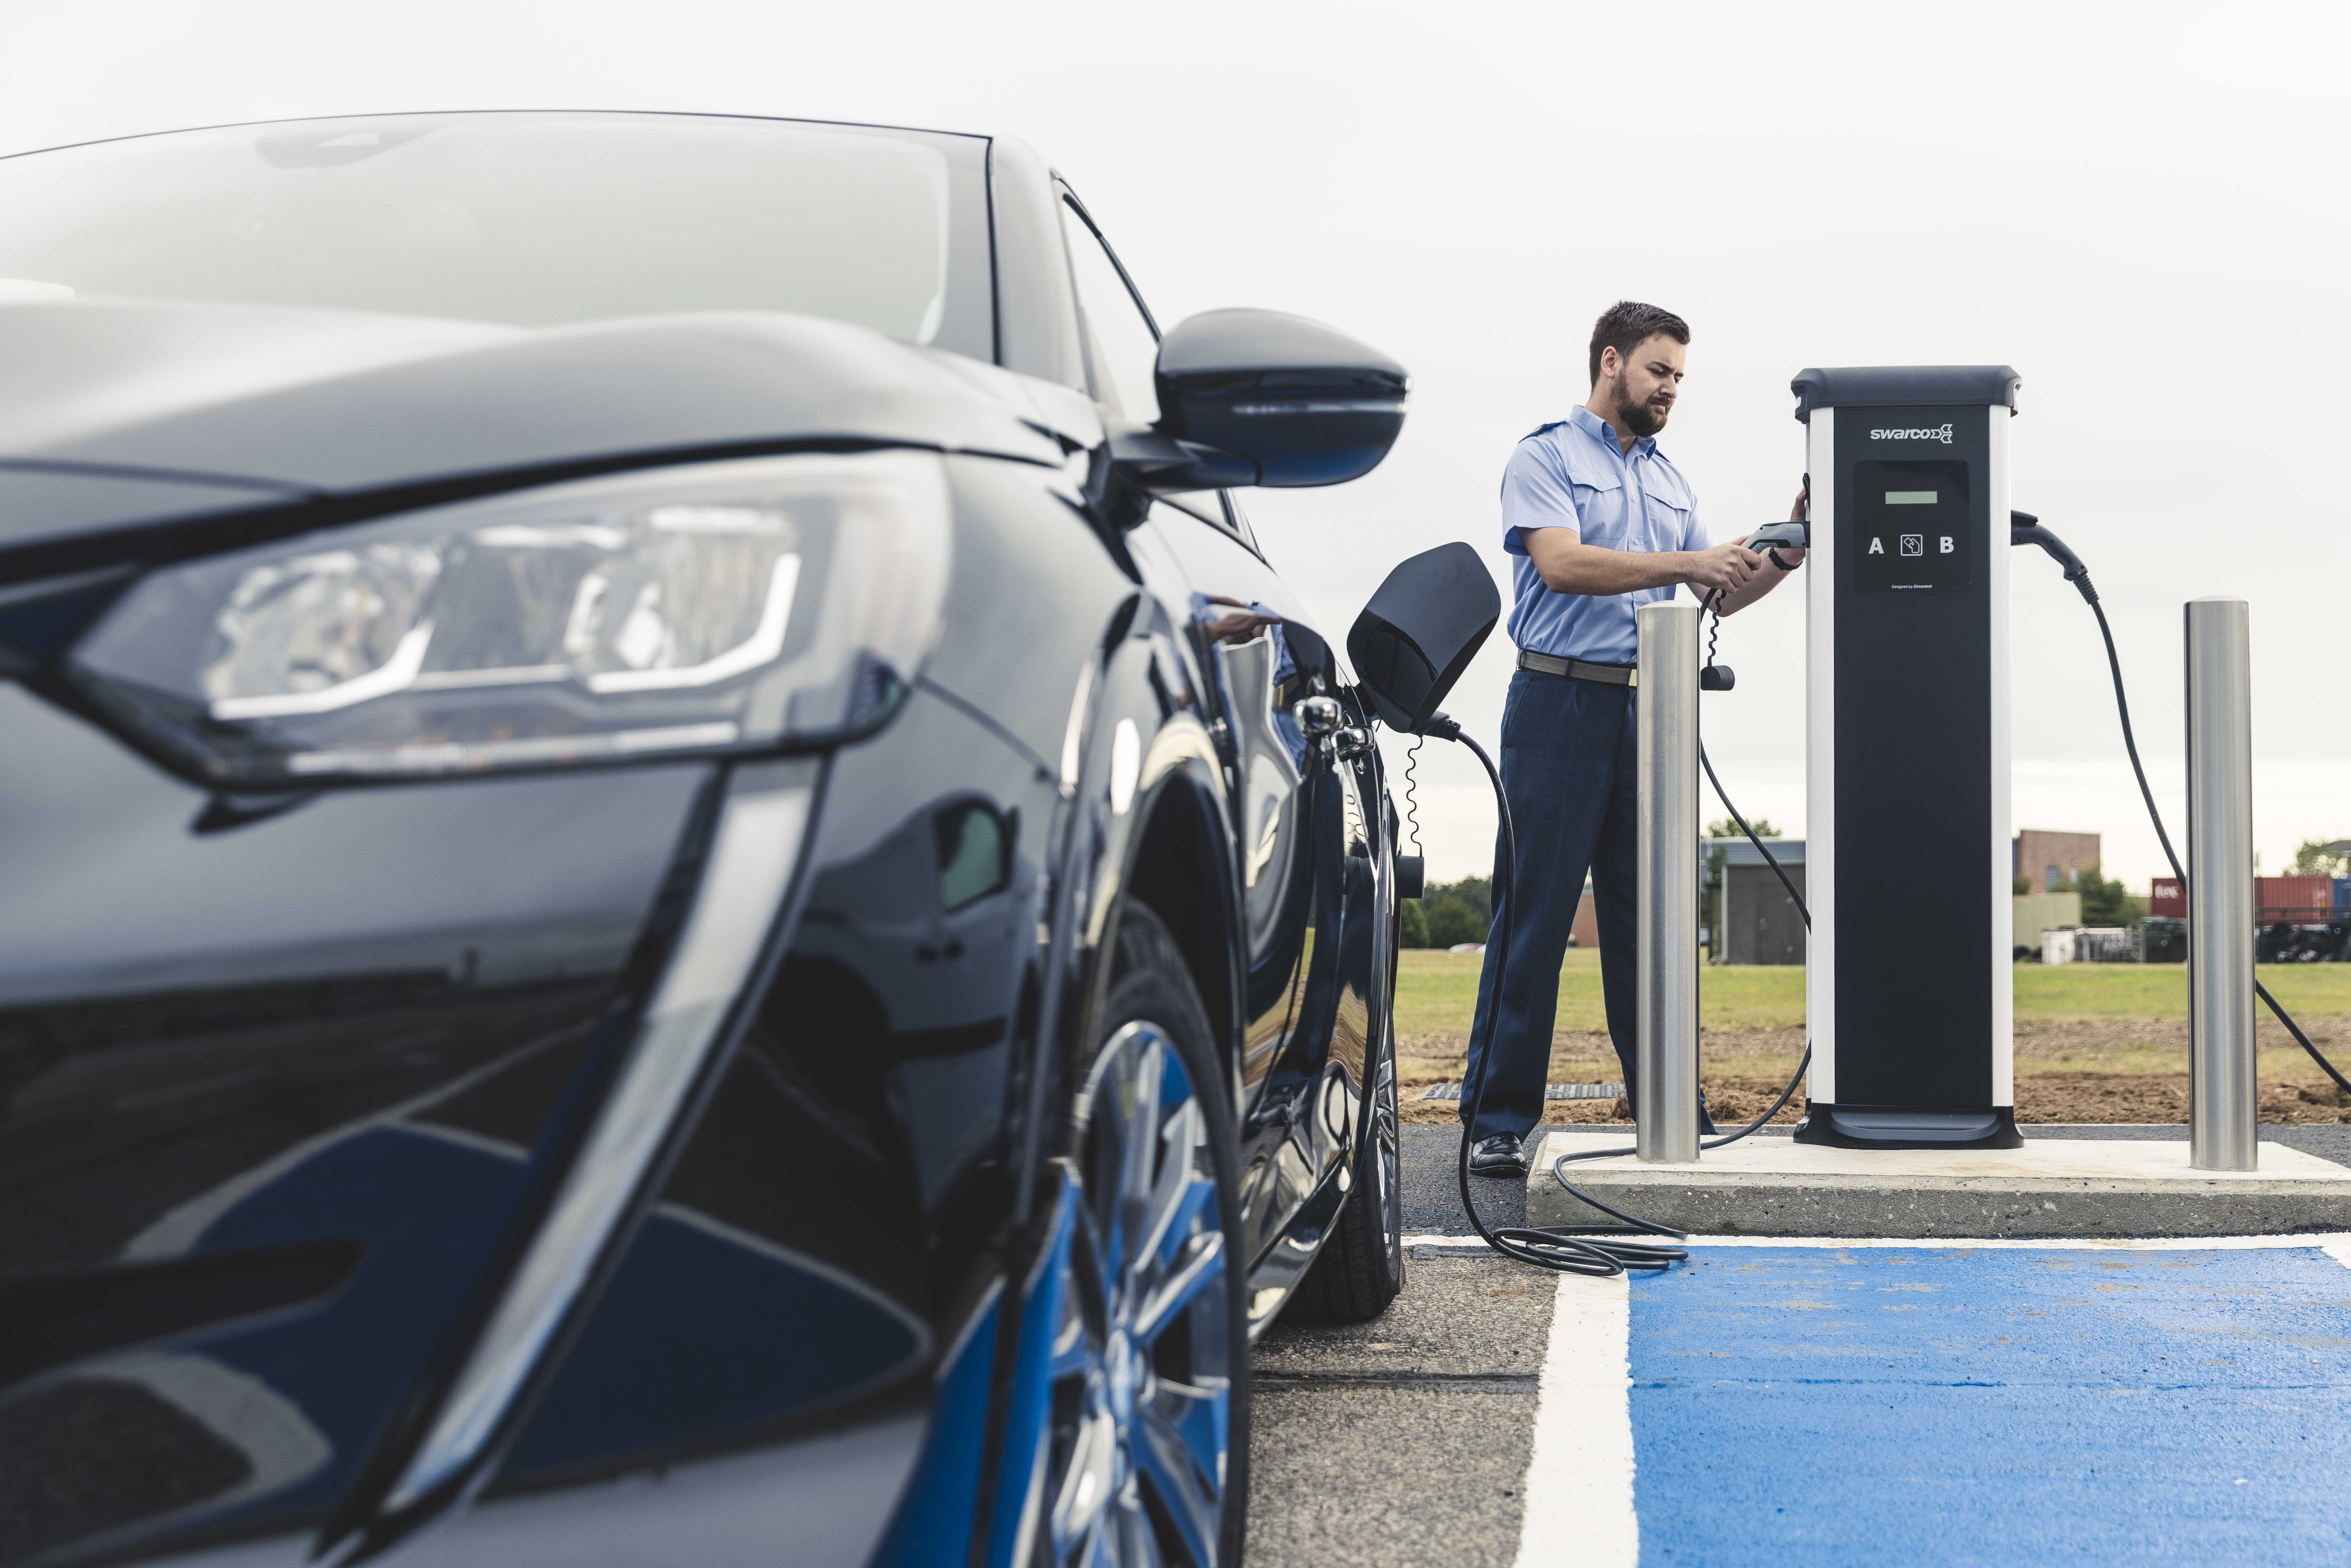 The world's fastest electric vehicle charger offers a full charge